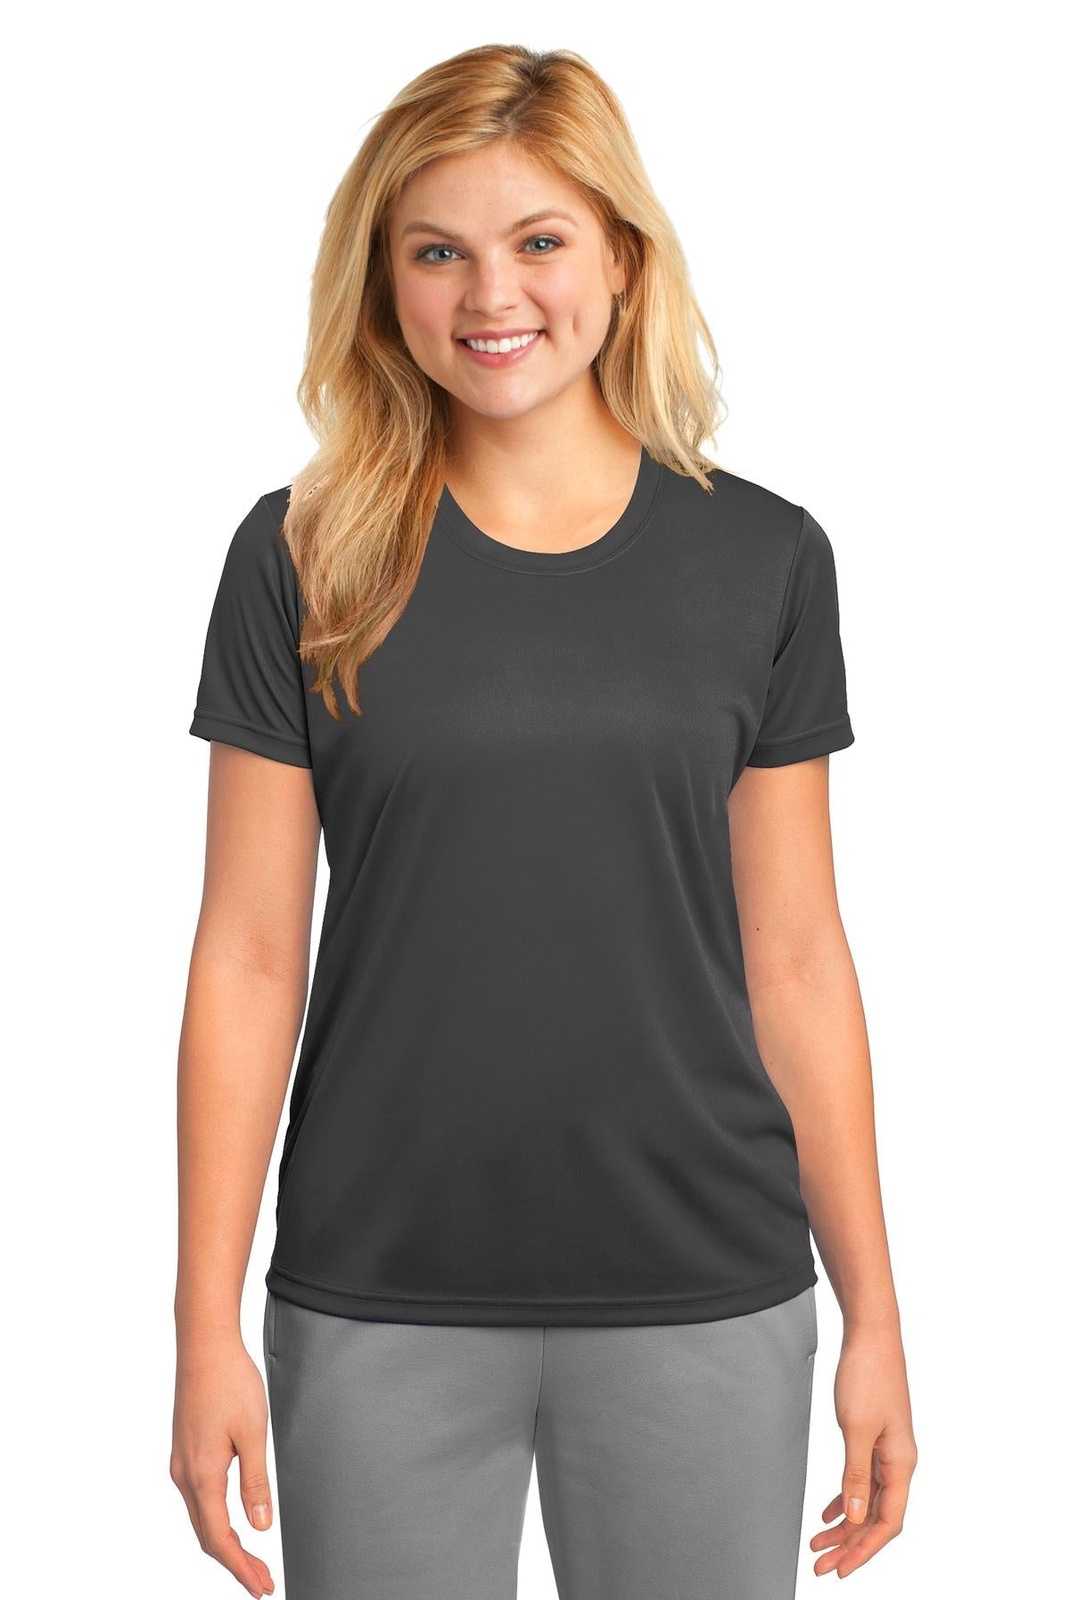 Port & Company LPC380 Ladies Performance Tee - Charcoal - HIT a Double - 1